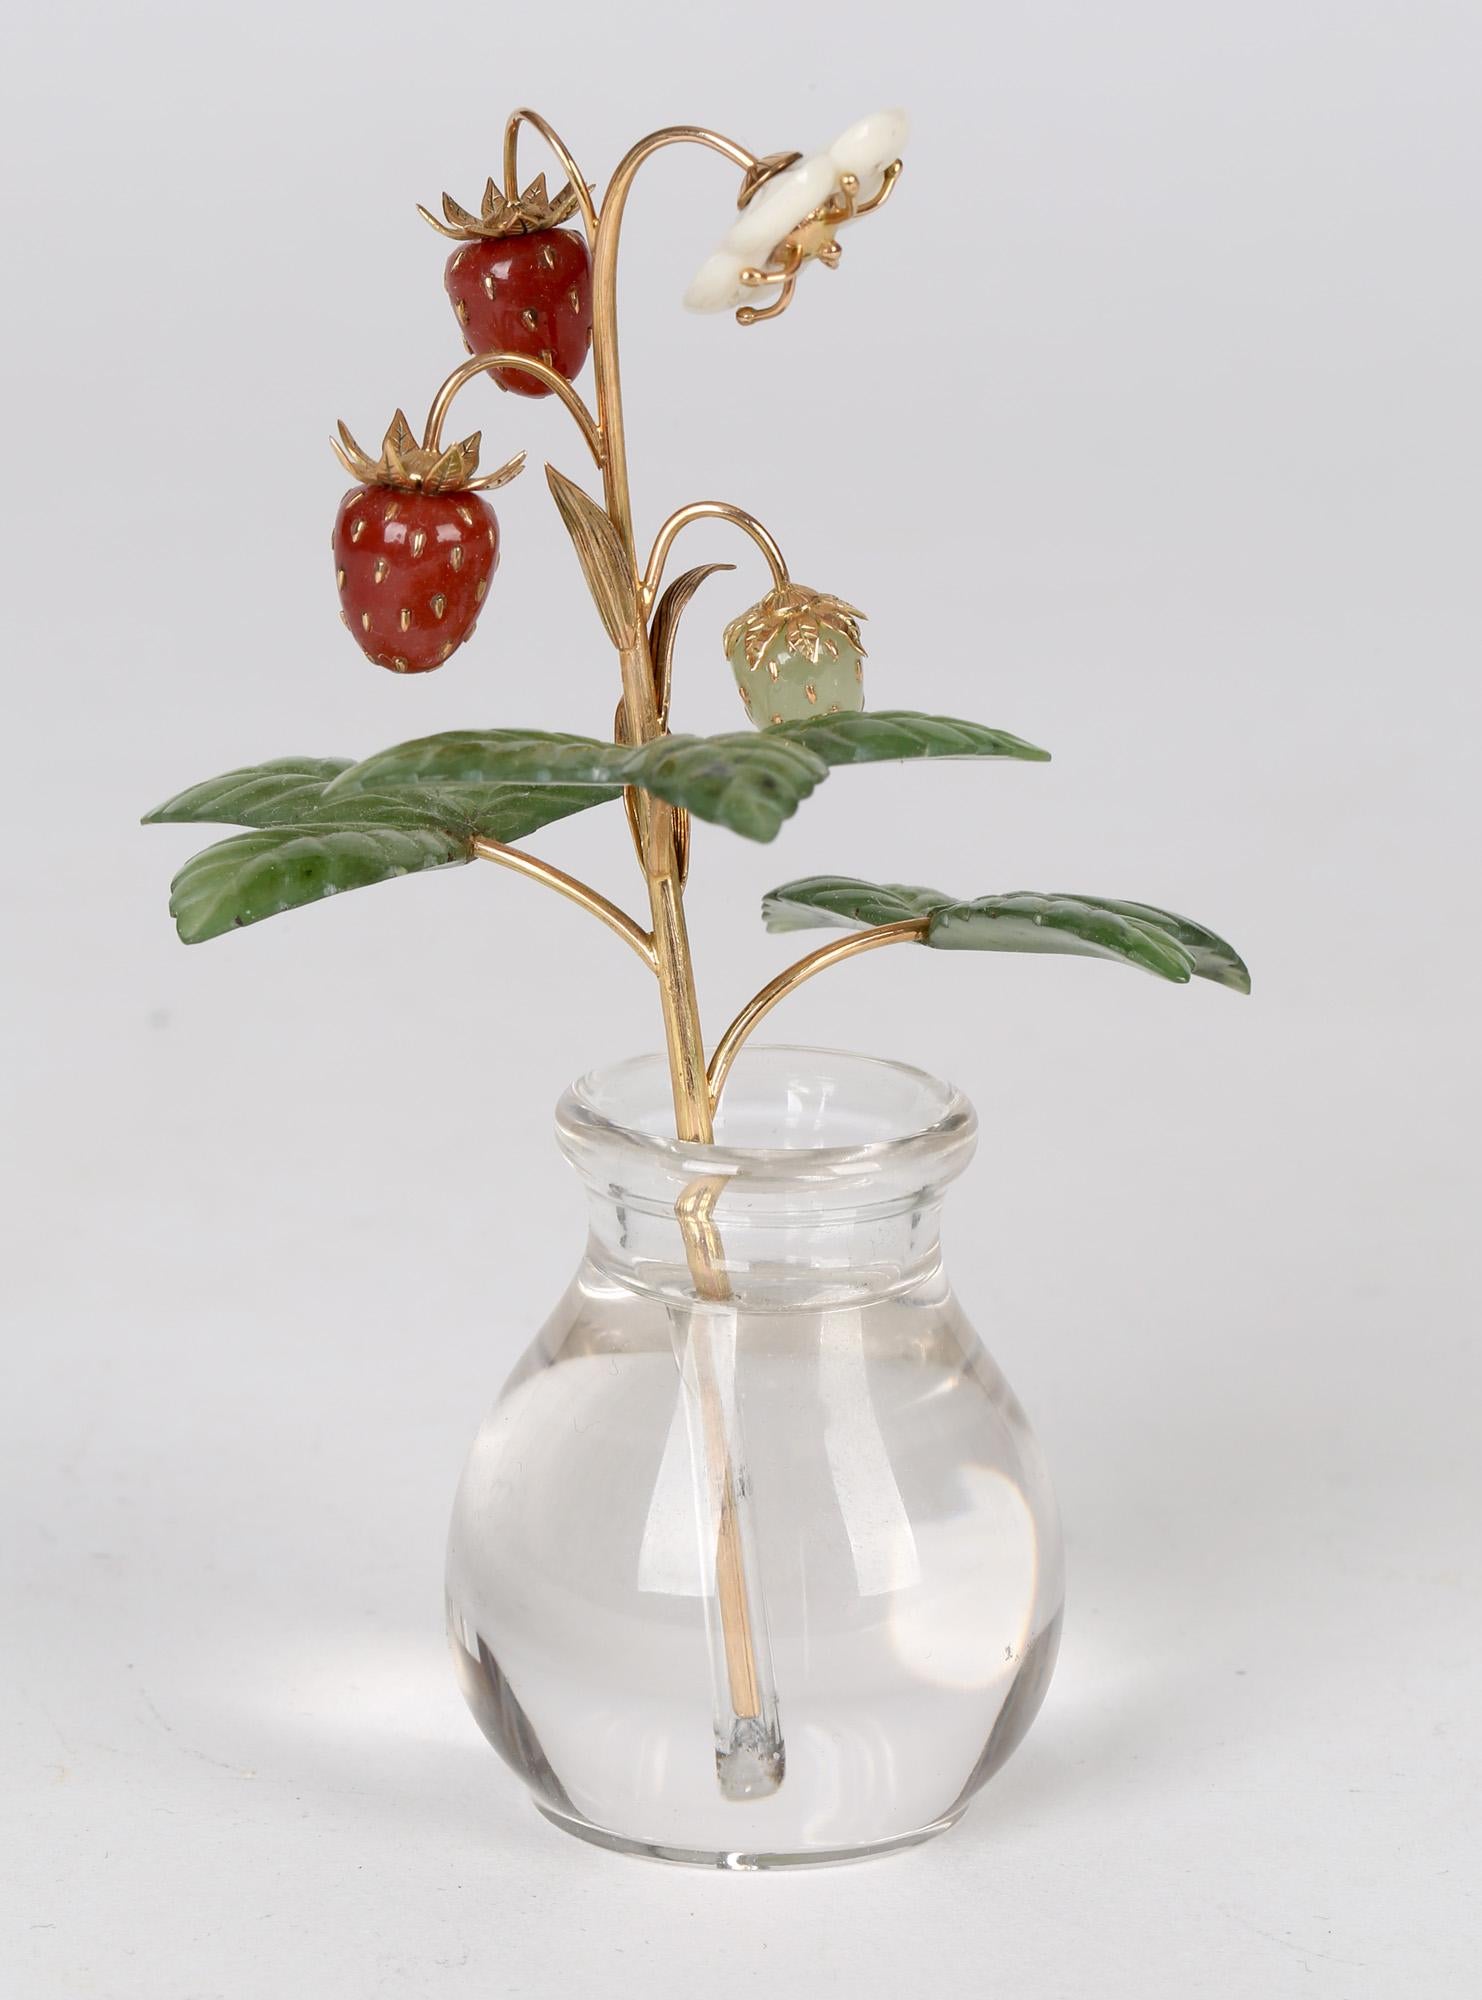 20th Century Fabergé Style Exquisite Wild Strawberry Stem with Crystal Vase